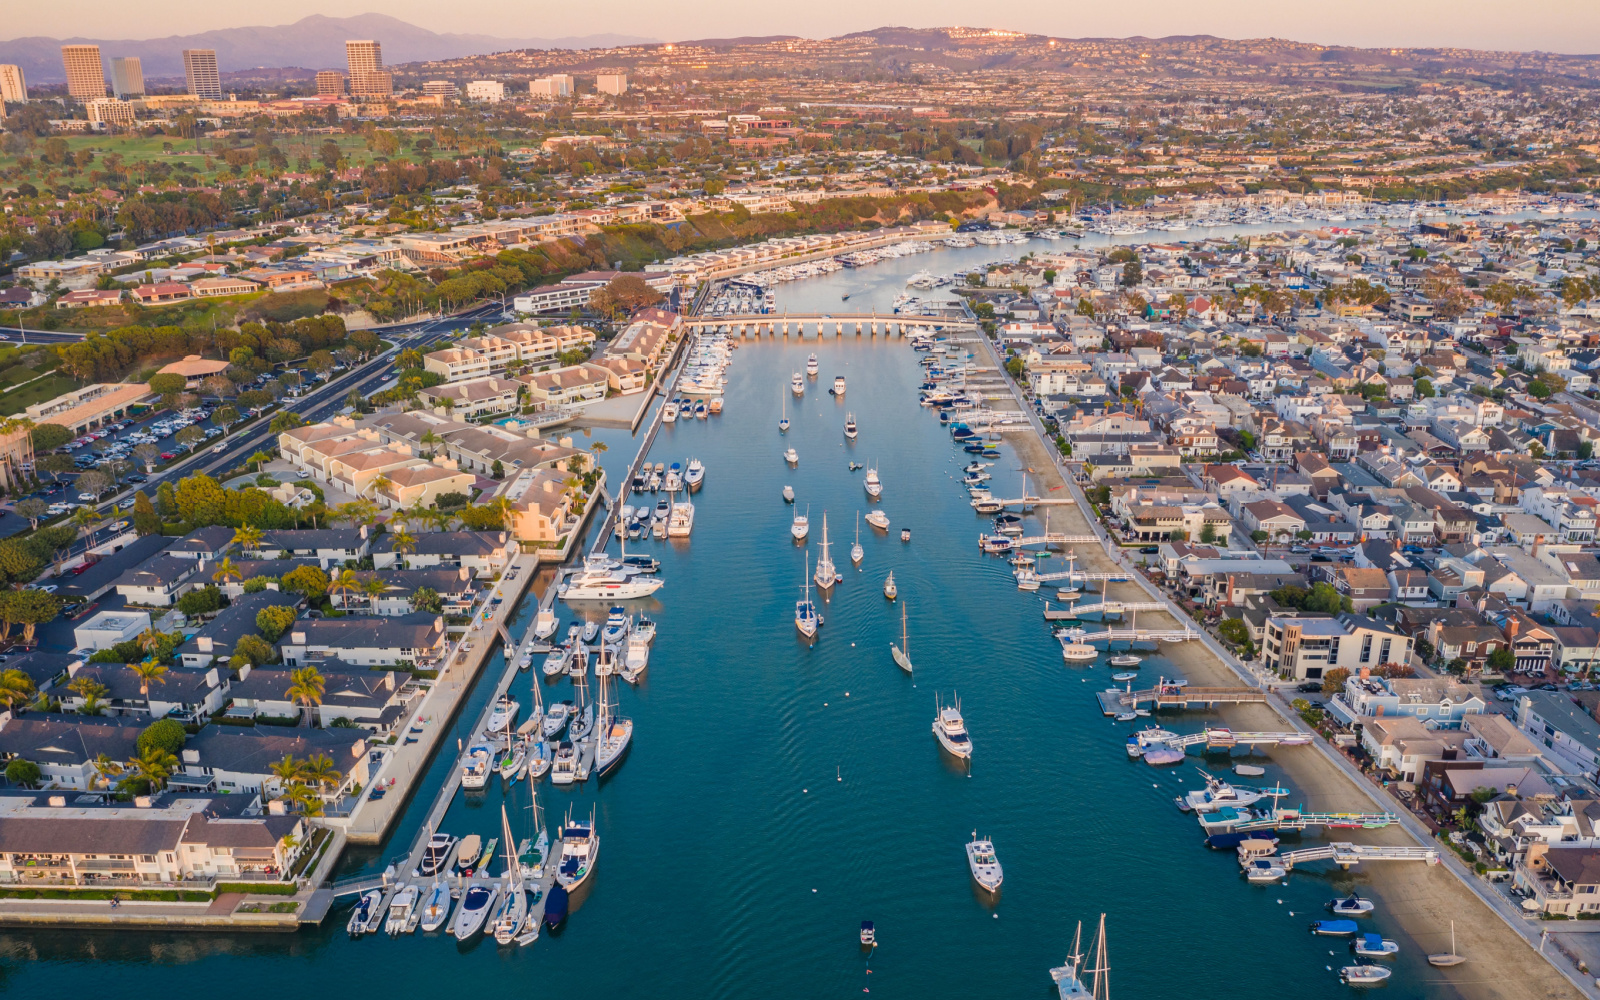 Why You Should Visit Balboa Island (and Things to Do!)